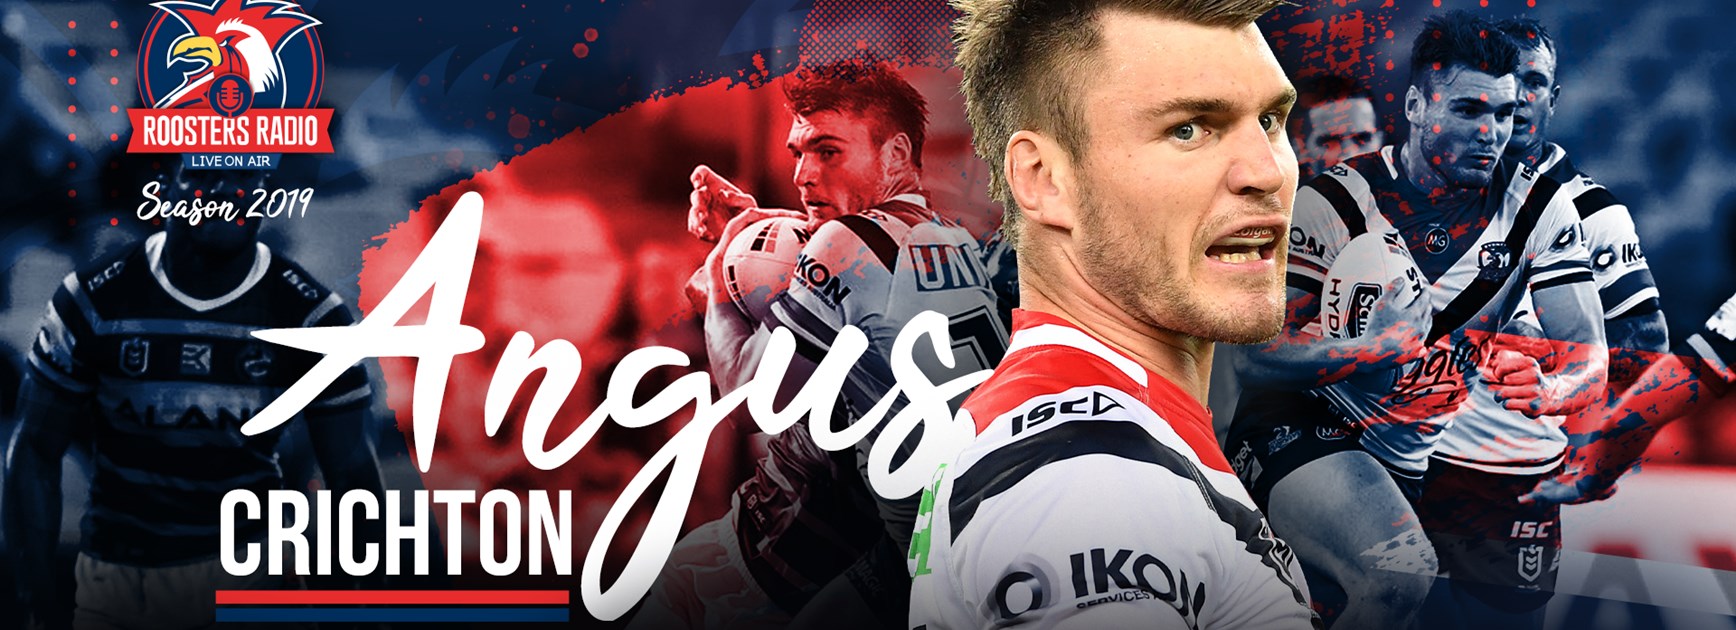 Roosters Radio | The Rivalry Continues